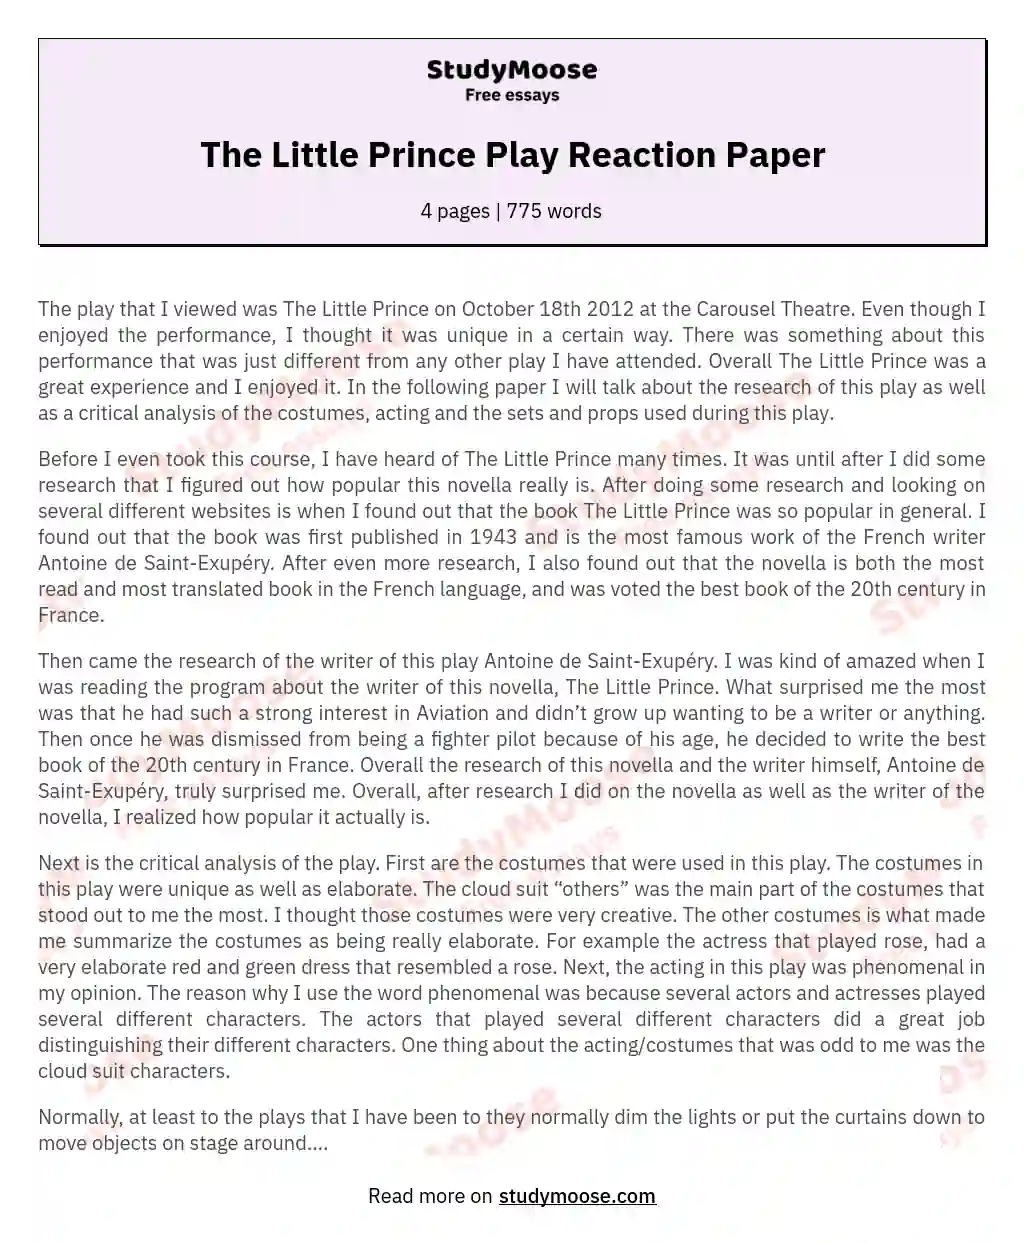 The Little Prince Play Reaction Paper